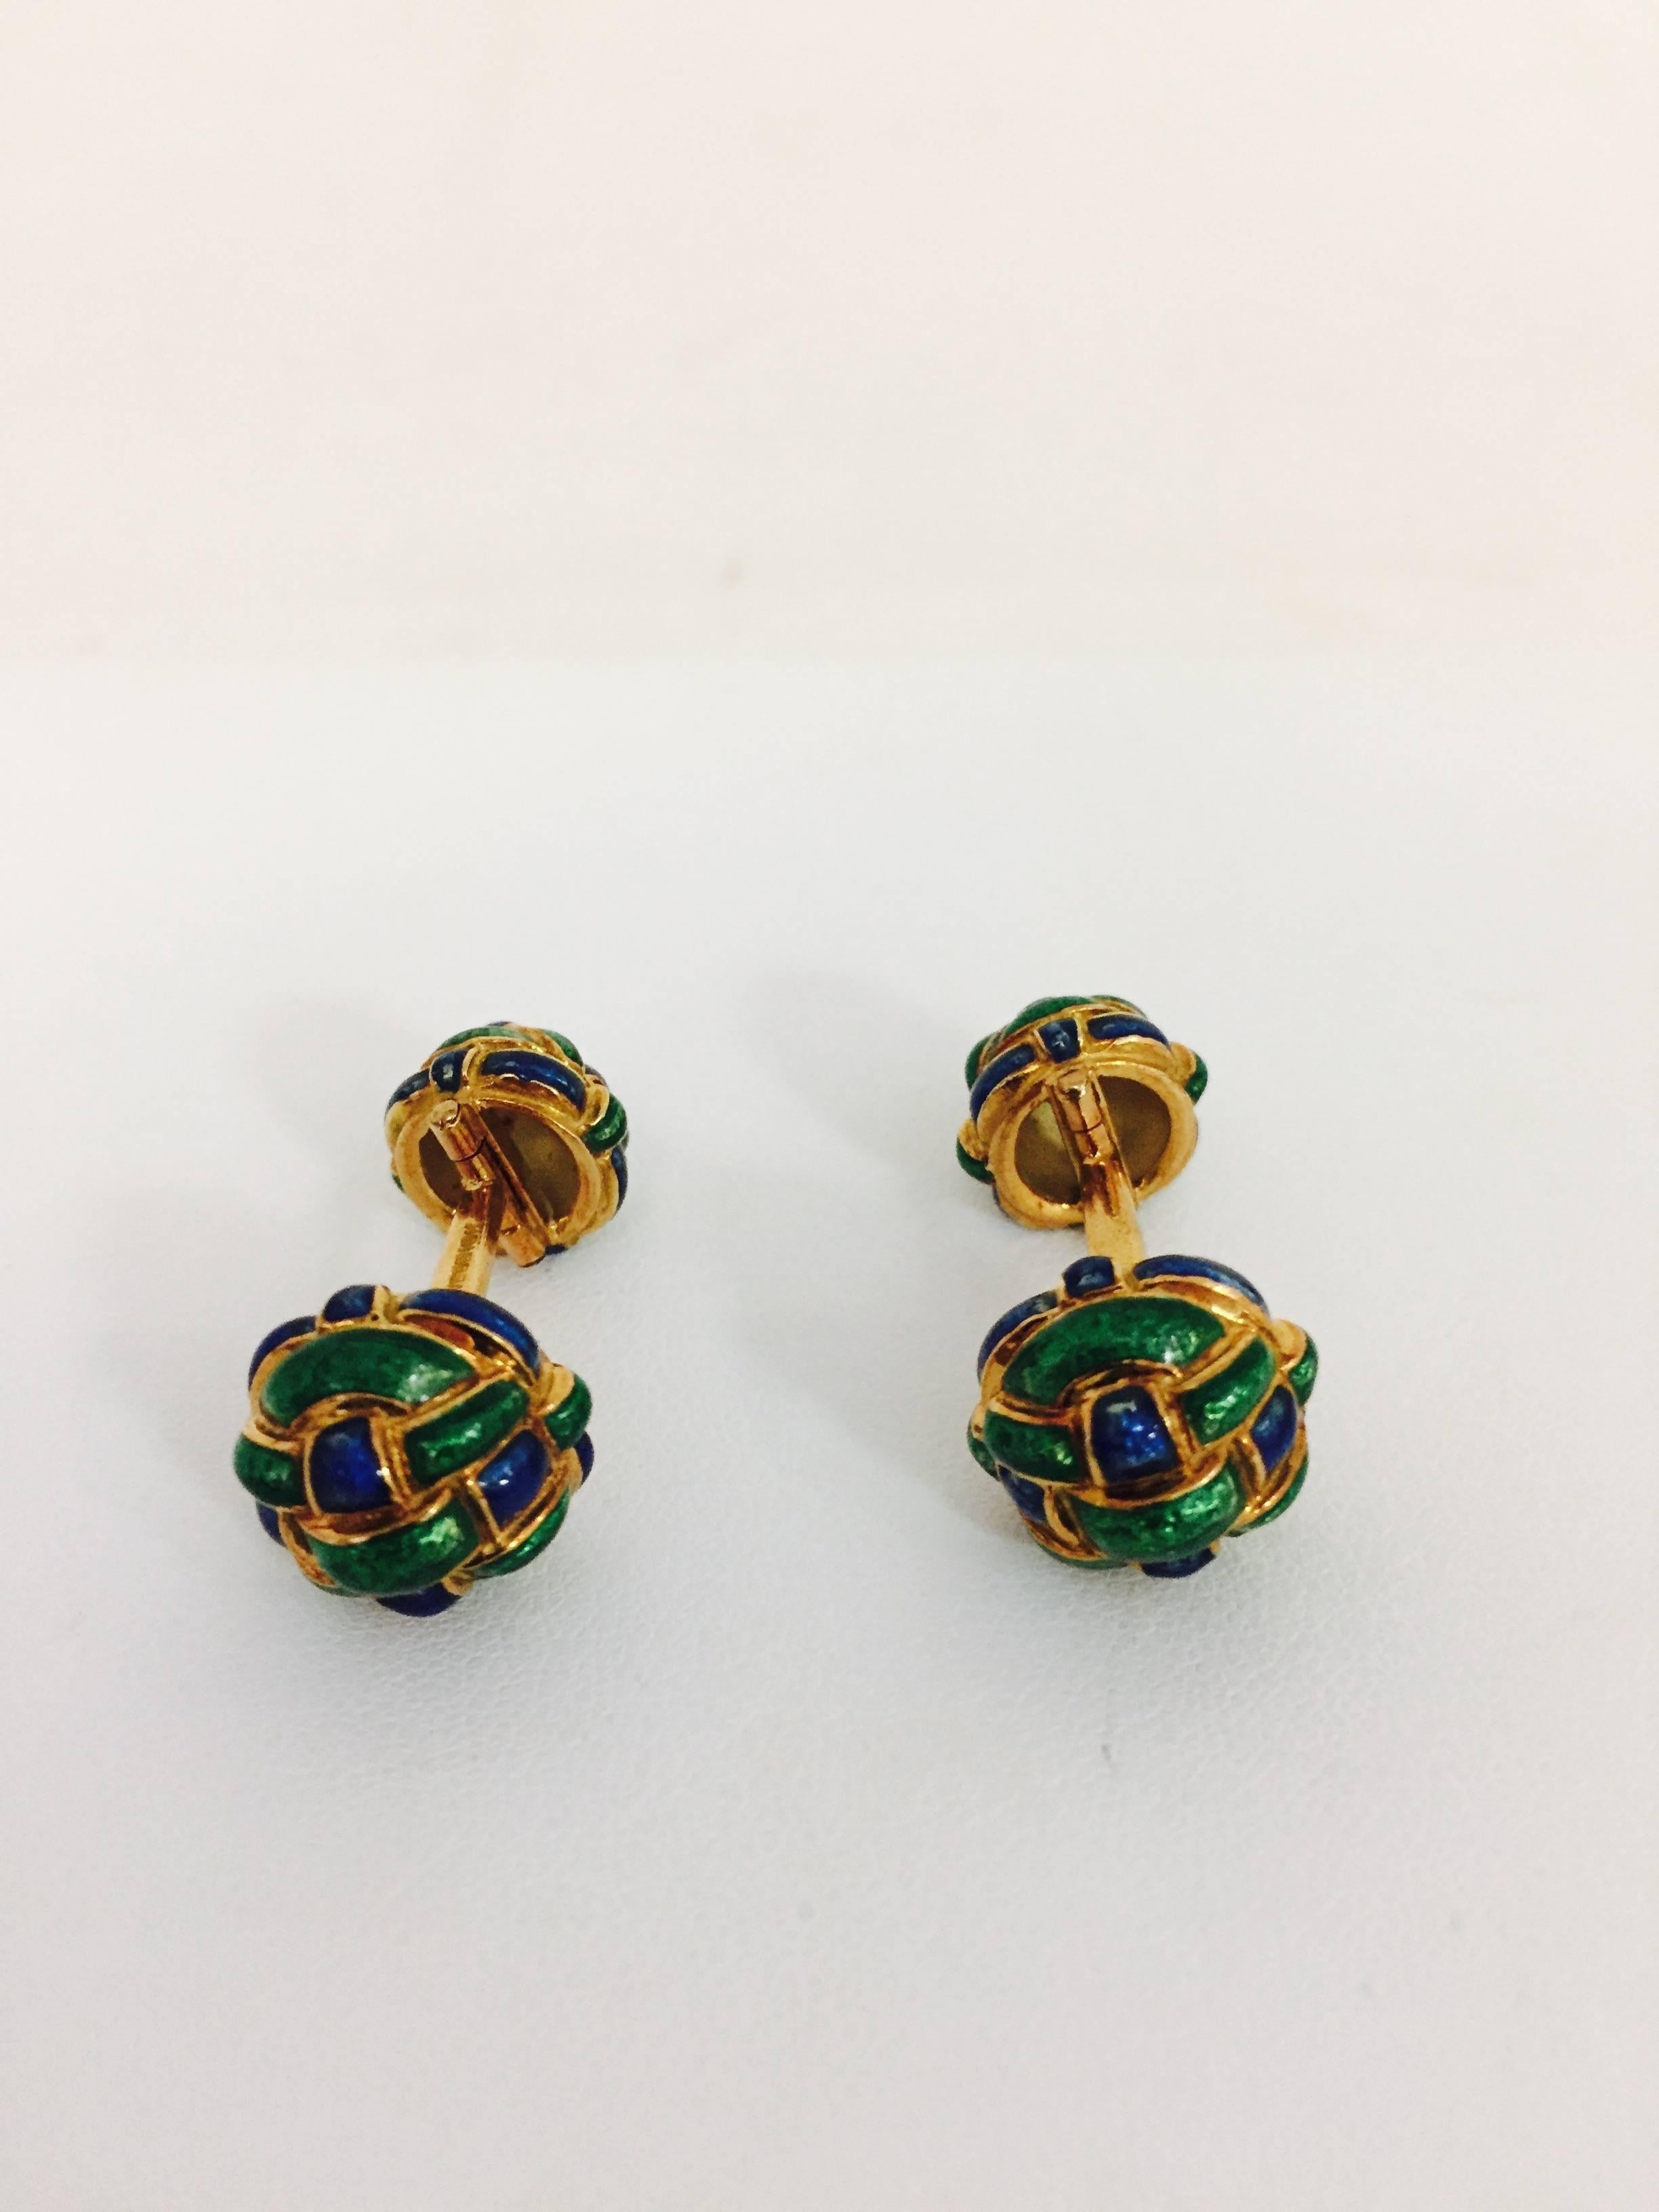 A perfect gift for Dad or Grad!  From the fabled David Webb, these gorgeous 18 karat yellow gold barbell style cufflinks feature intricately woven enamel sections in jewel tone emerald green and sapphire blue.  Oh yes, ladies will be delighted to